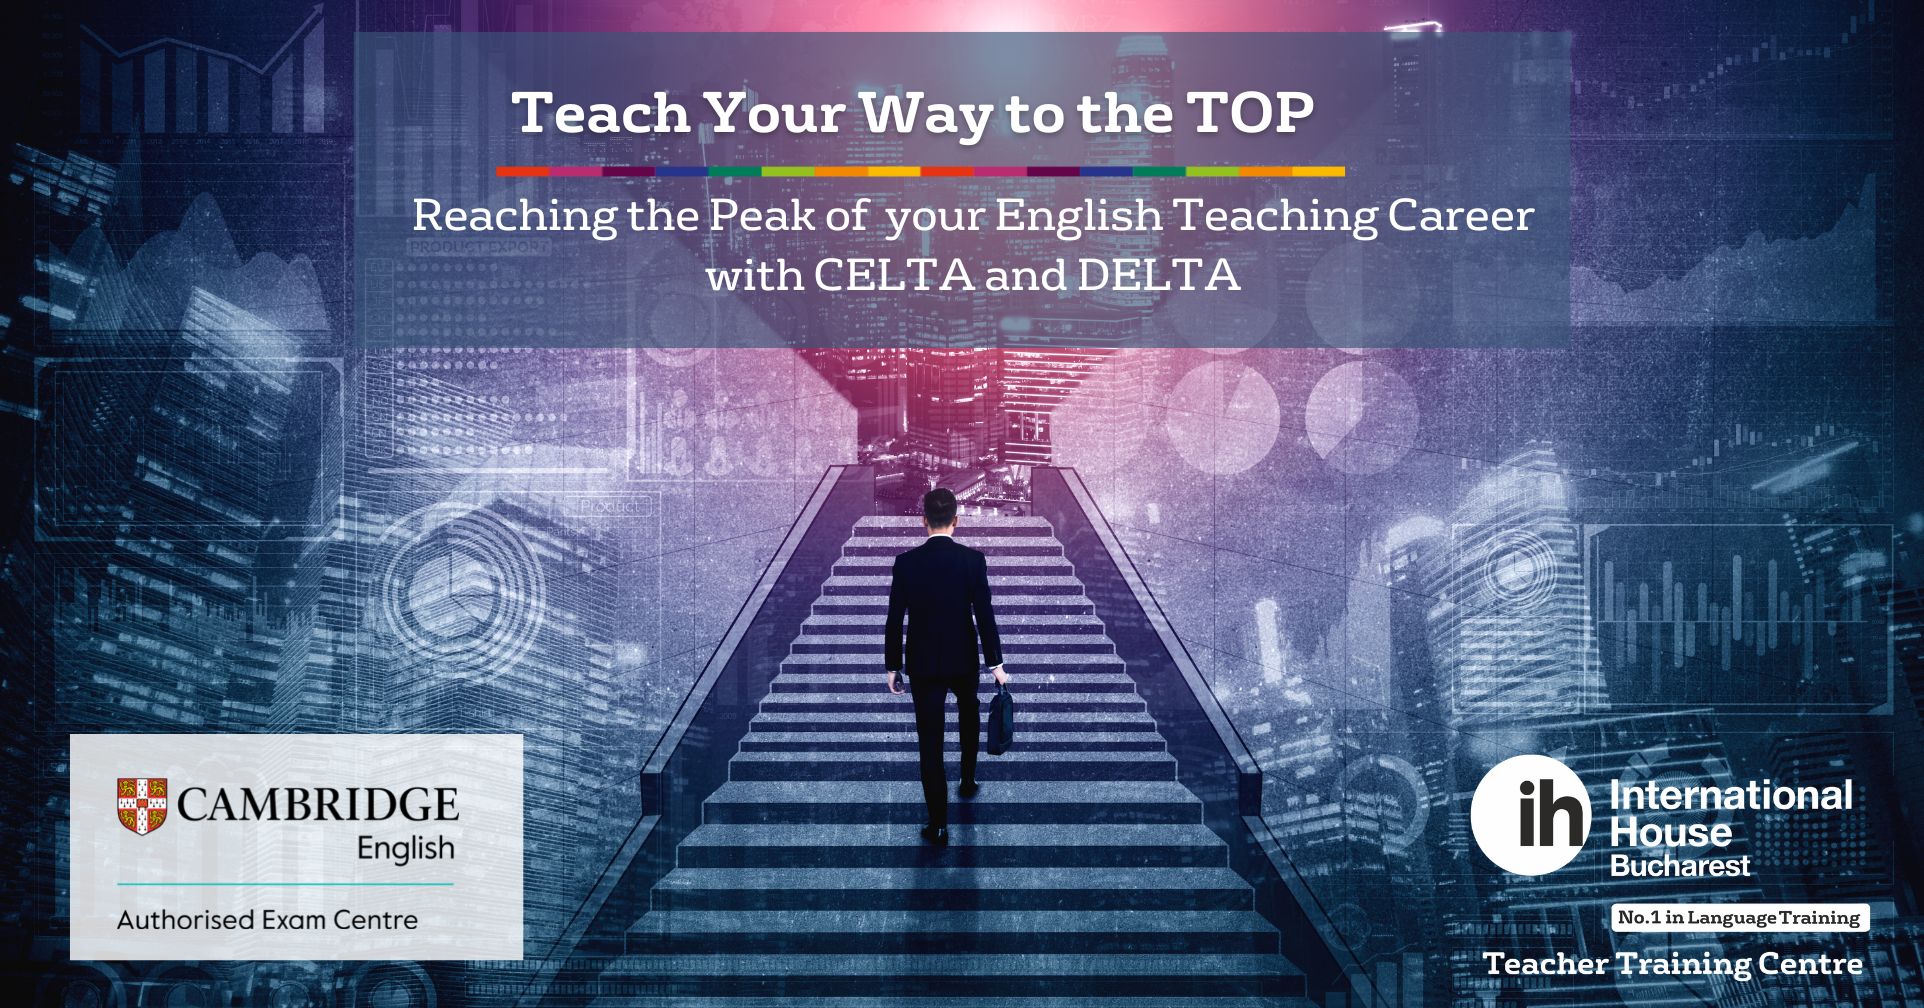 Reaching the Peak of Your English Teaching Career with CELTA and DELTA.